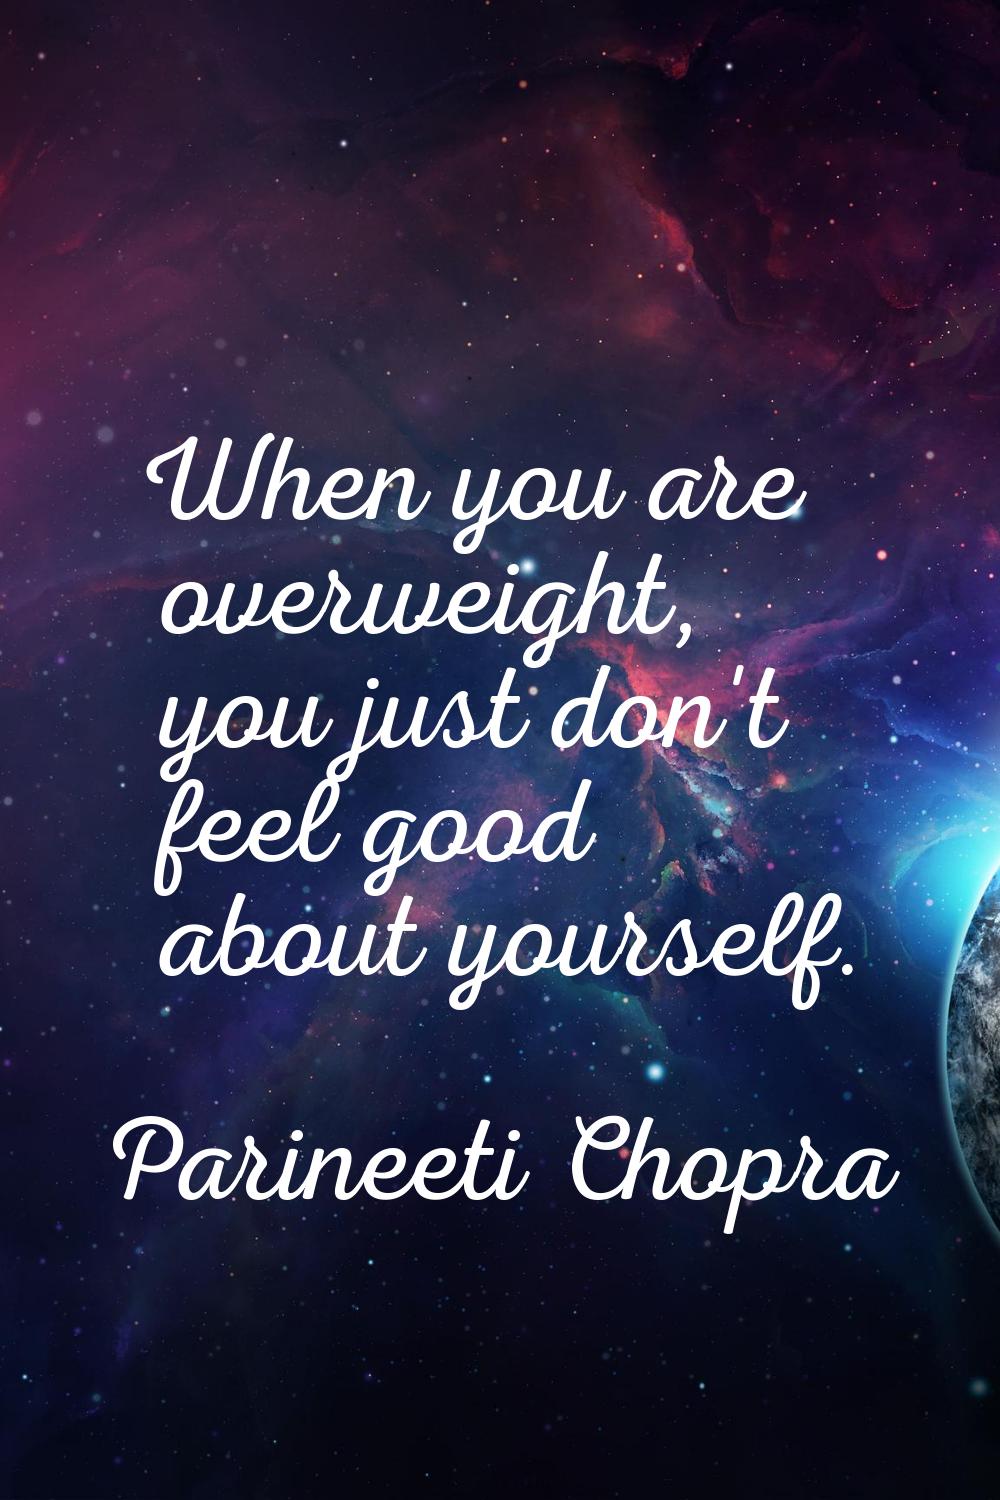 When you are overweight, you just don't feel good about yourself.